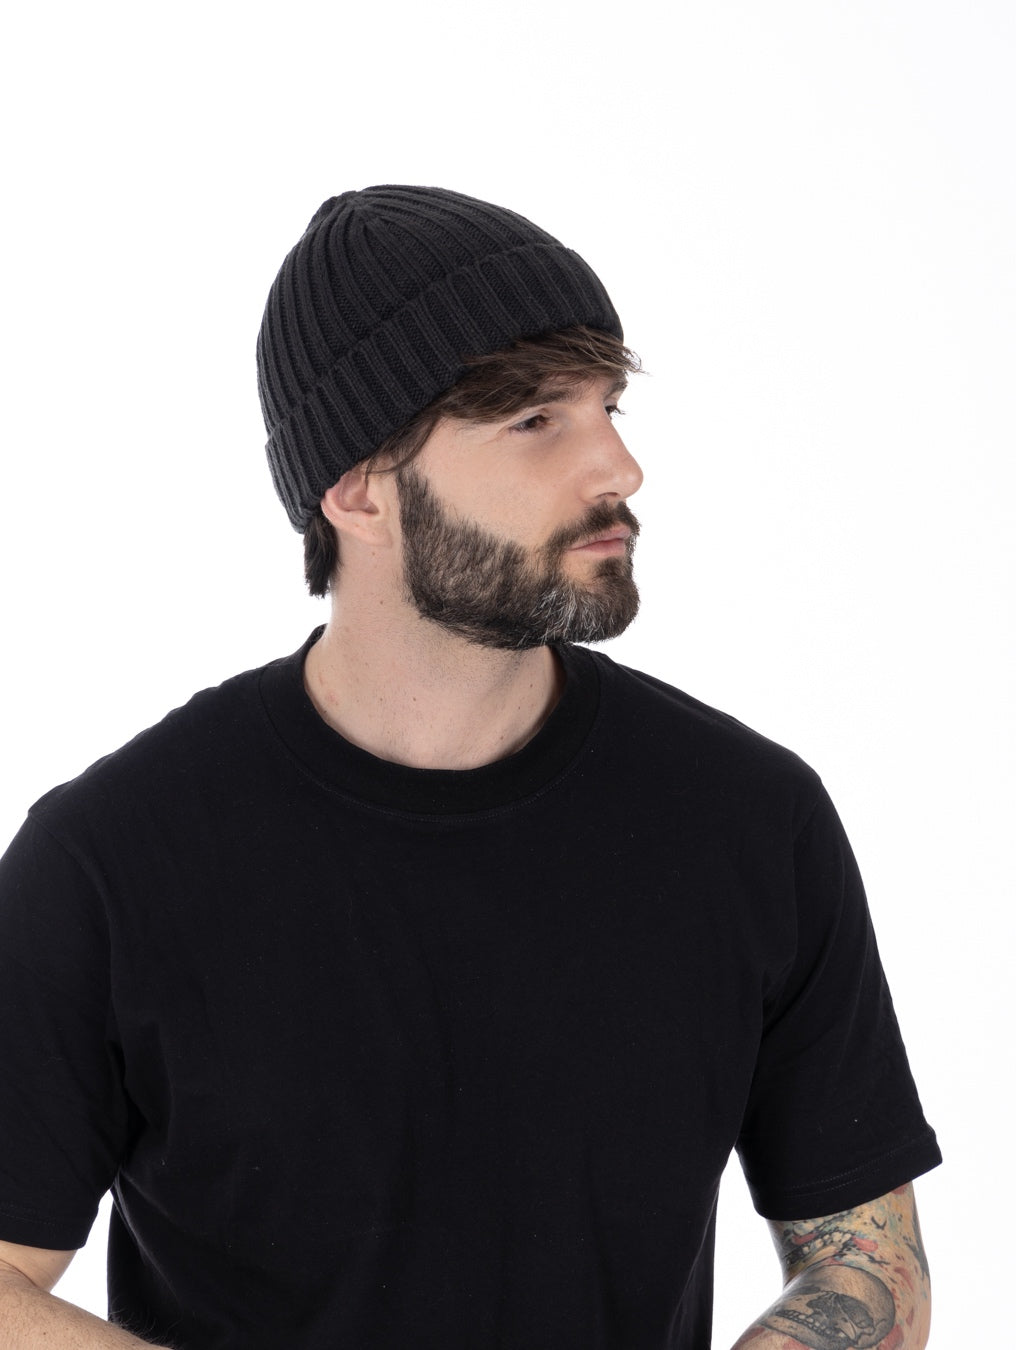 Ny - anthracite ribbed hat